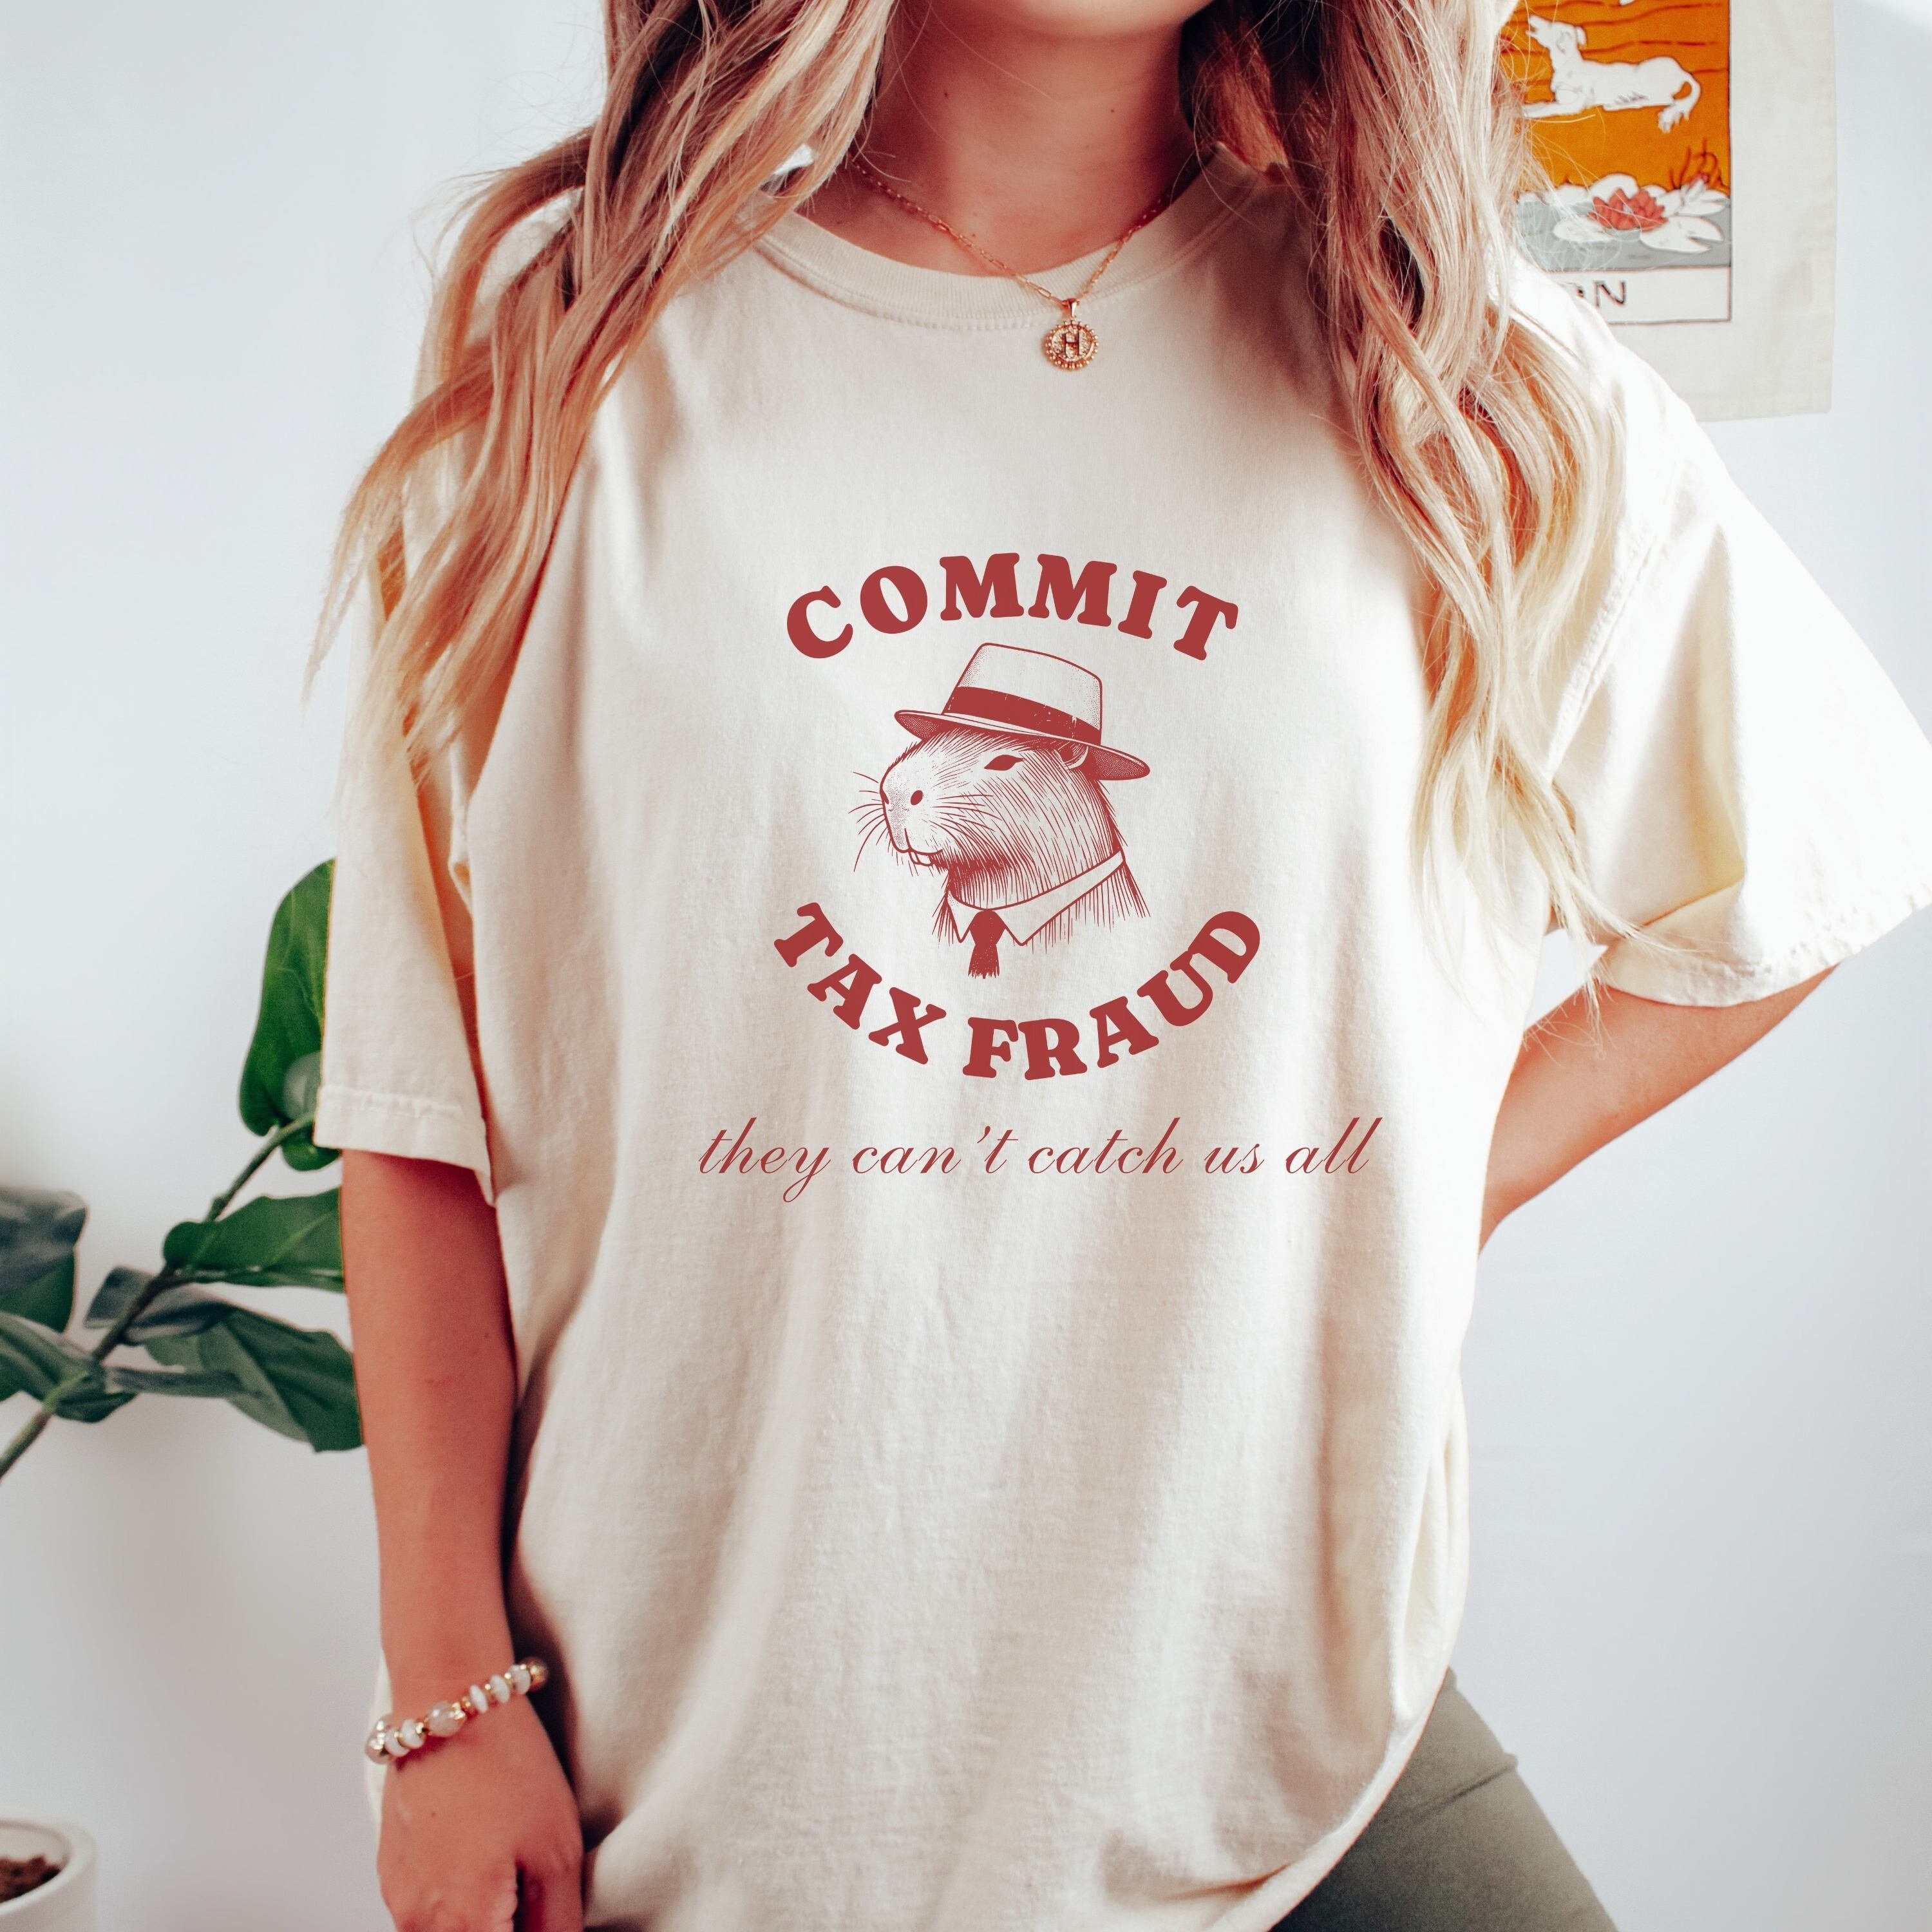 Discover Commit Tax Fraud Capybara Shirt, Funny Snarky Retro Y2K Cute Graphic Tee